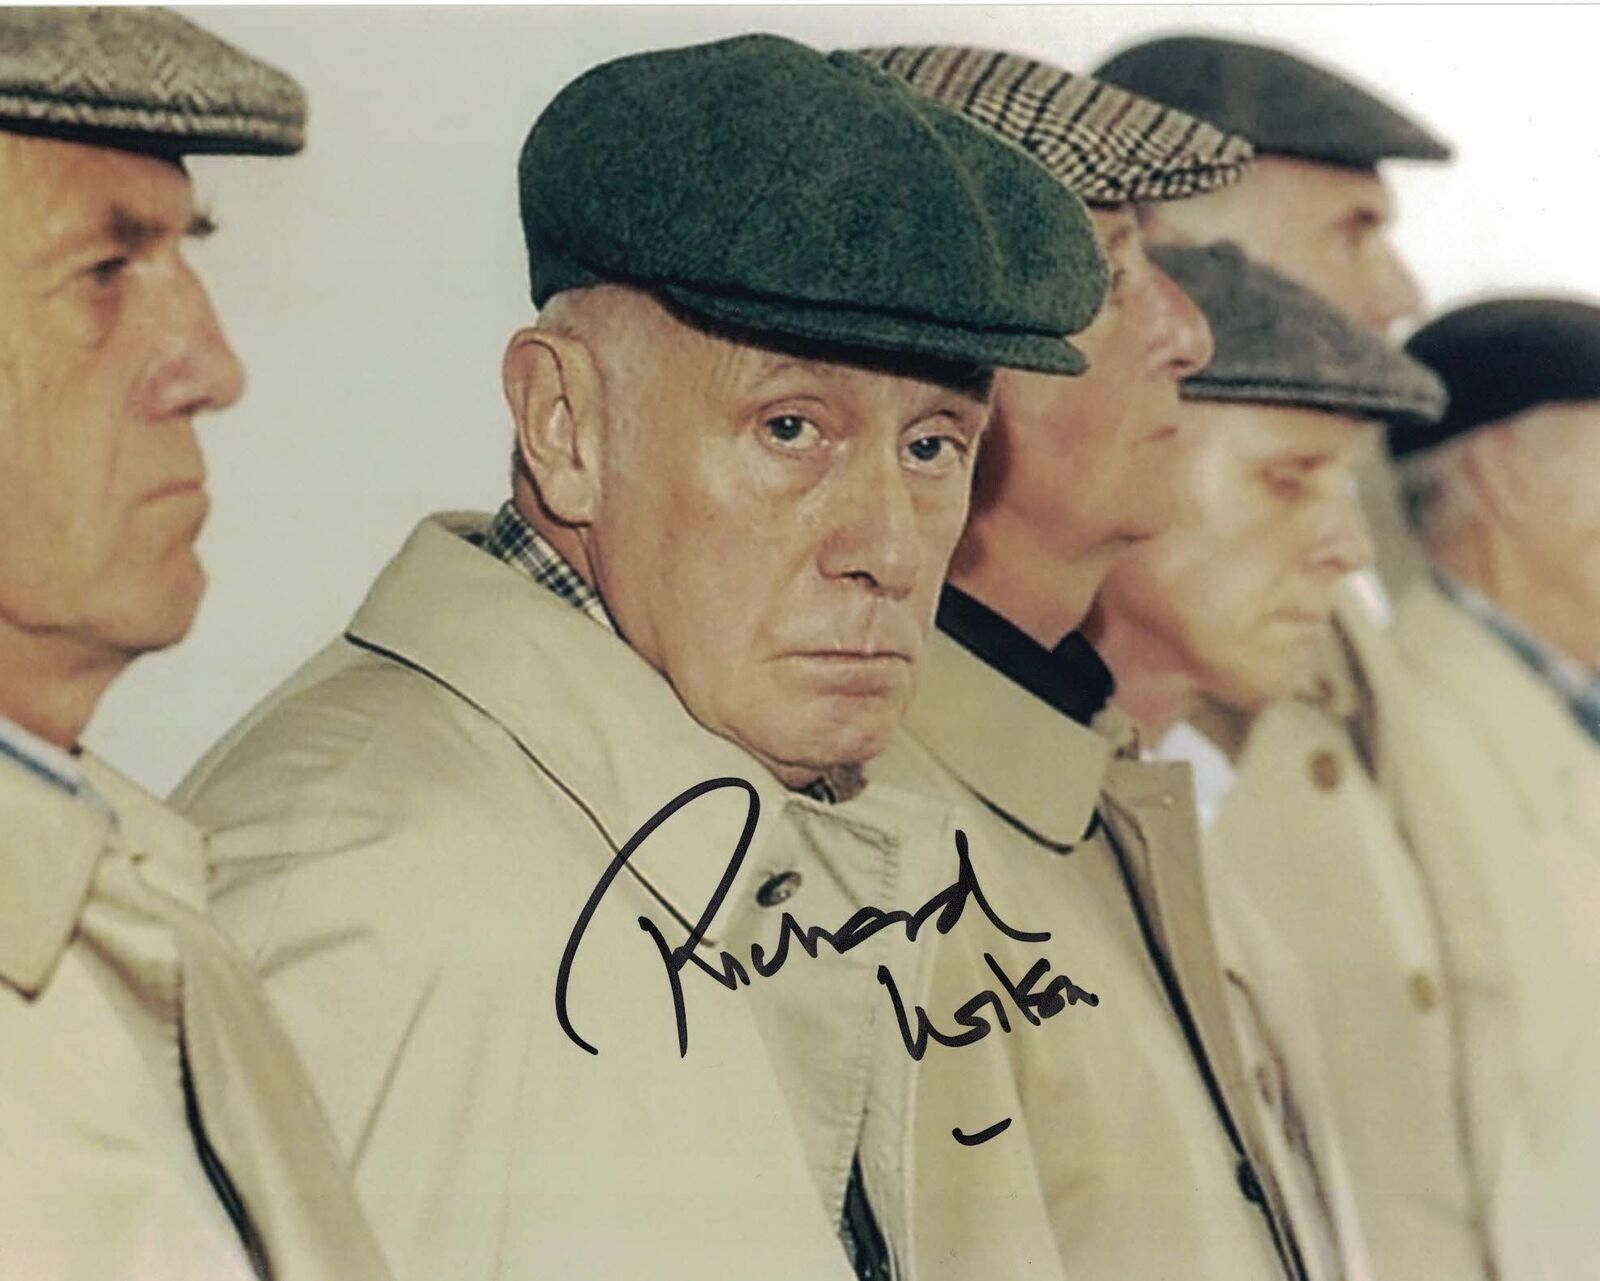 RICHARD WILSON - Victor Meldrew - One Foot In The Grave hand signed 10 x 8 Photo Poster painting